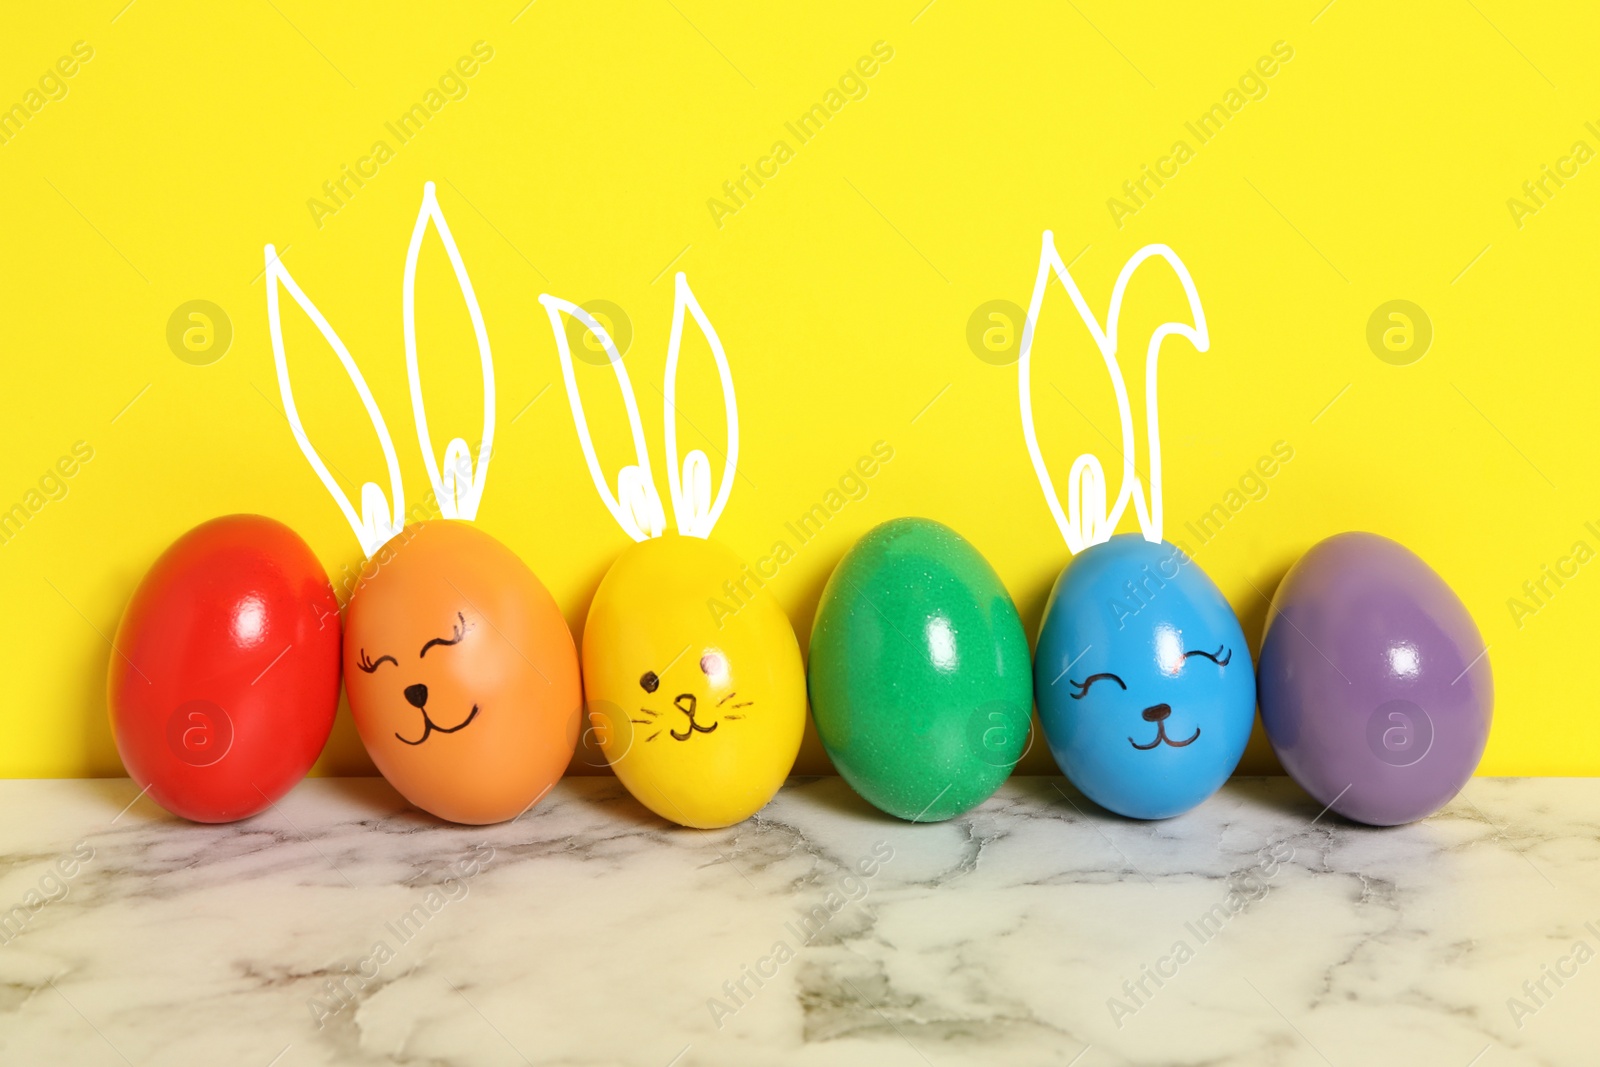 Image of Several eggs with drawn faces and ears as Easter bunnies among others on white marble table against yellow background